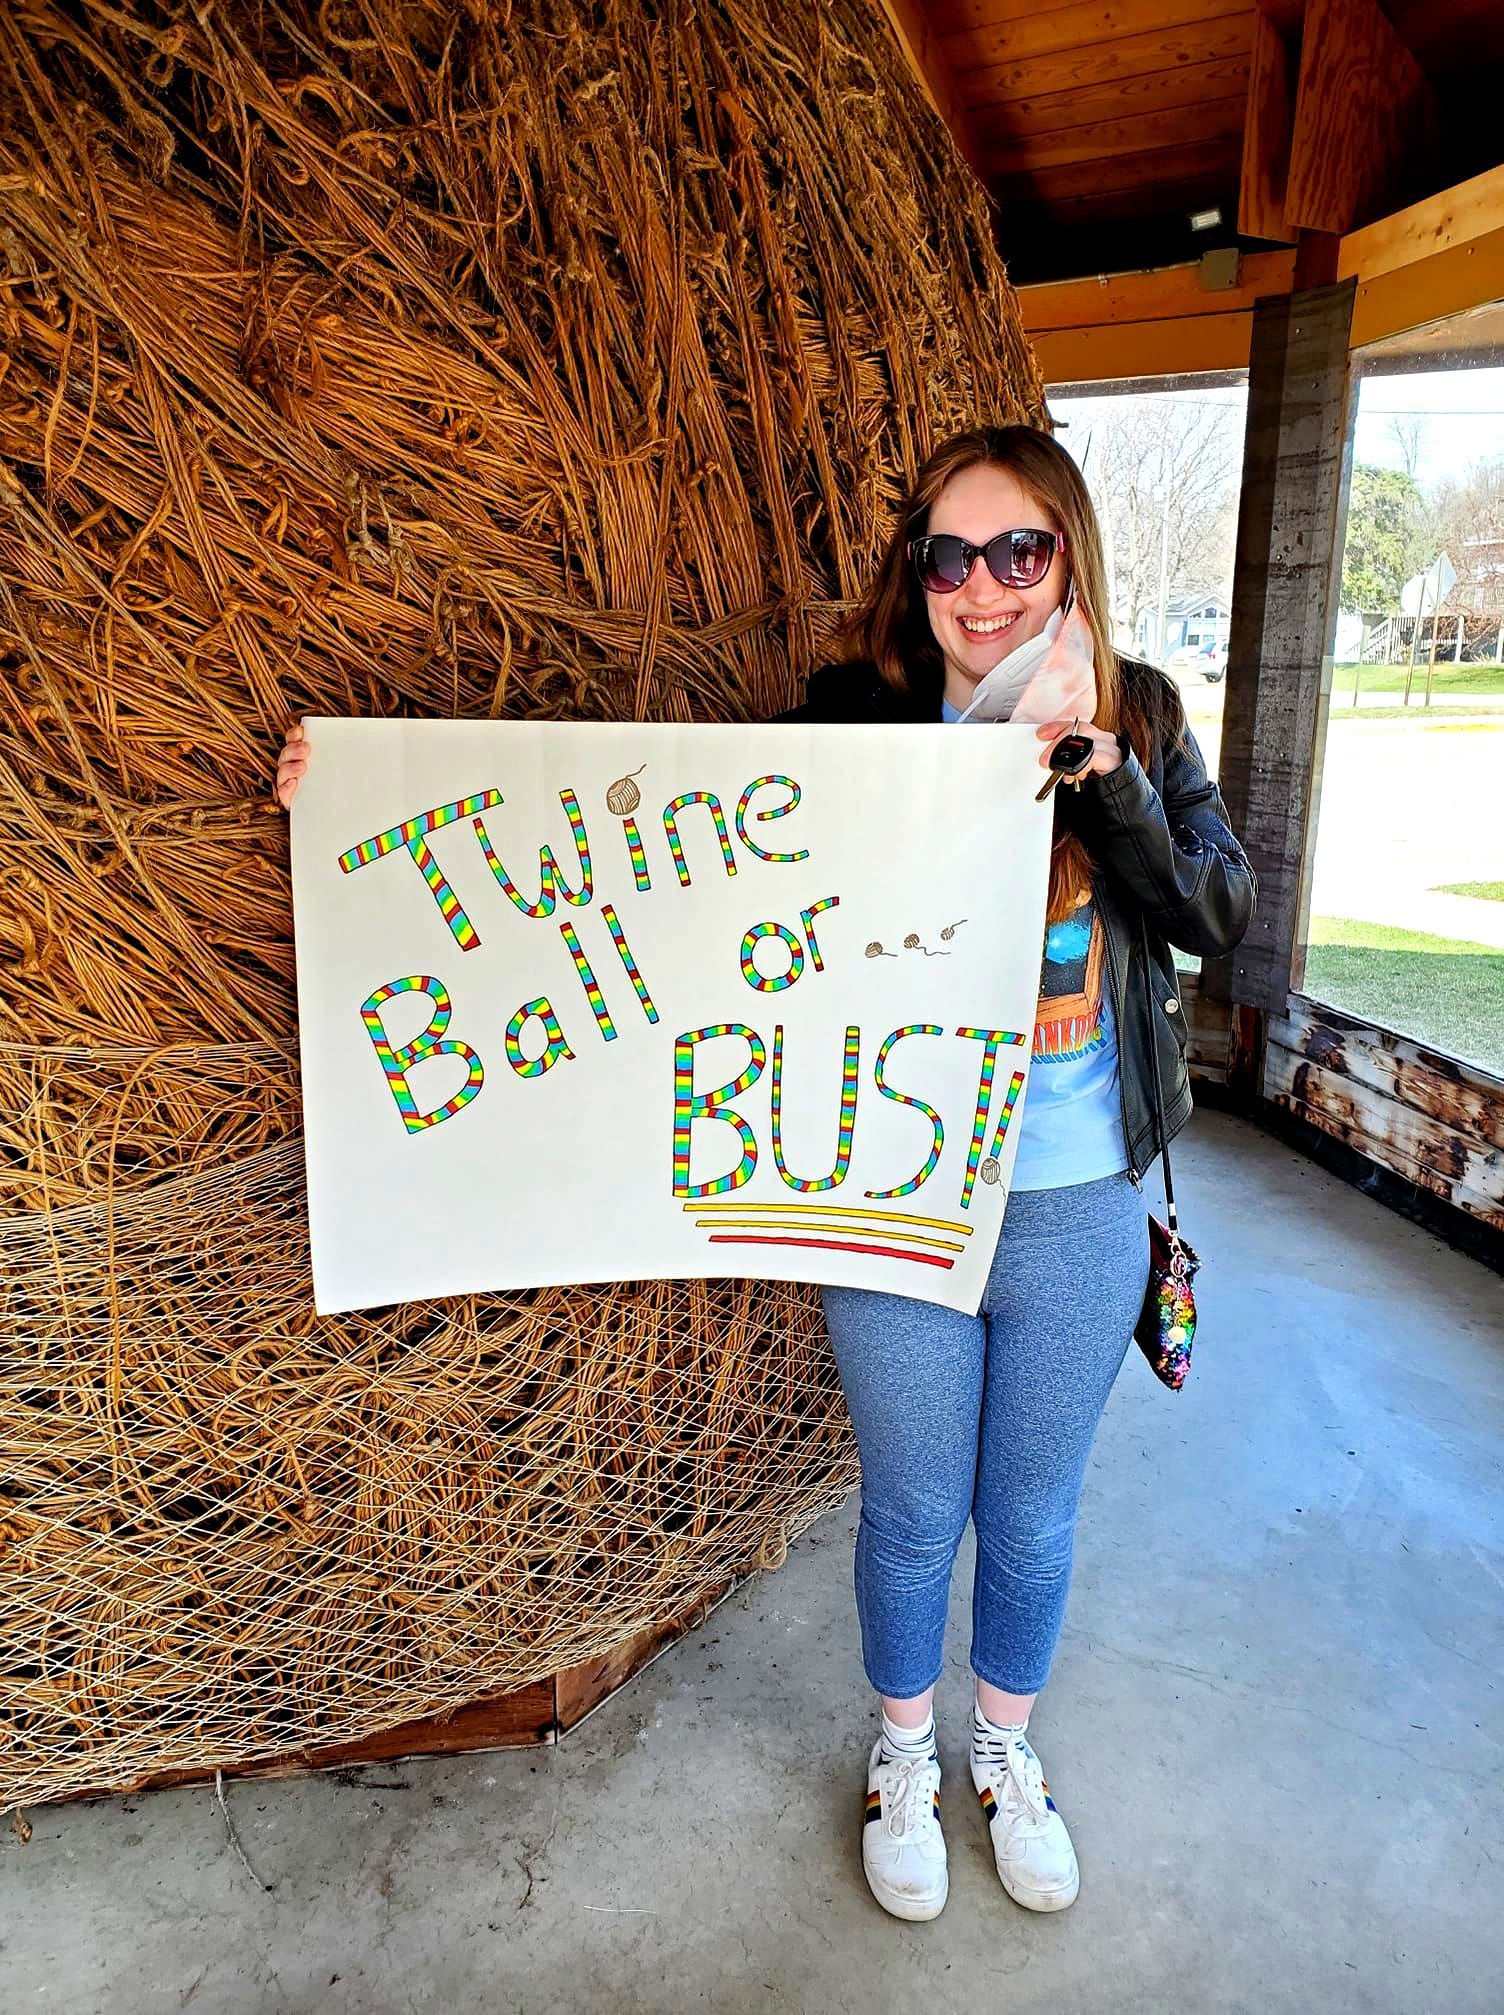 World's Largest Ball of Twine Rolled by One Man, world record in Darwin, Minnesota